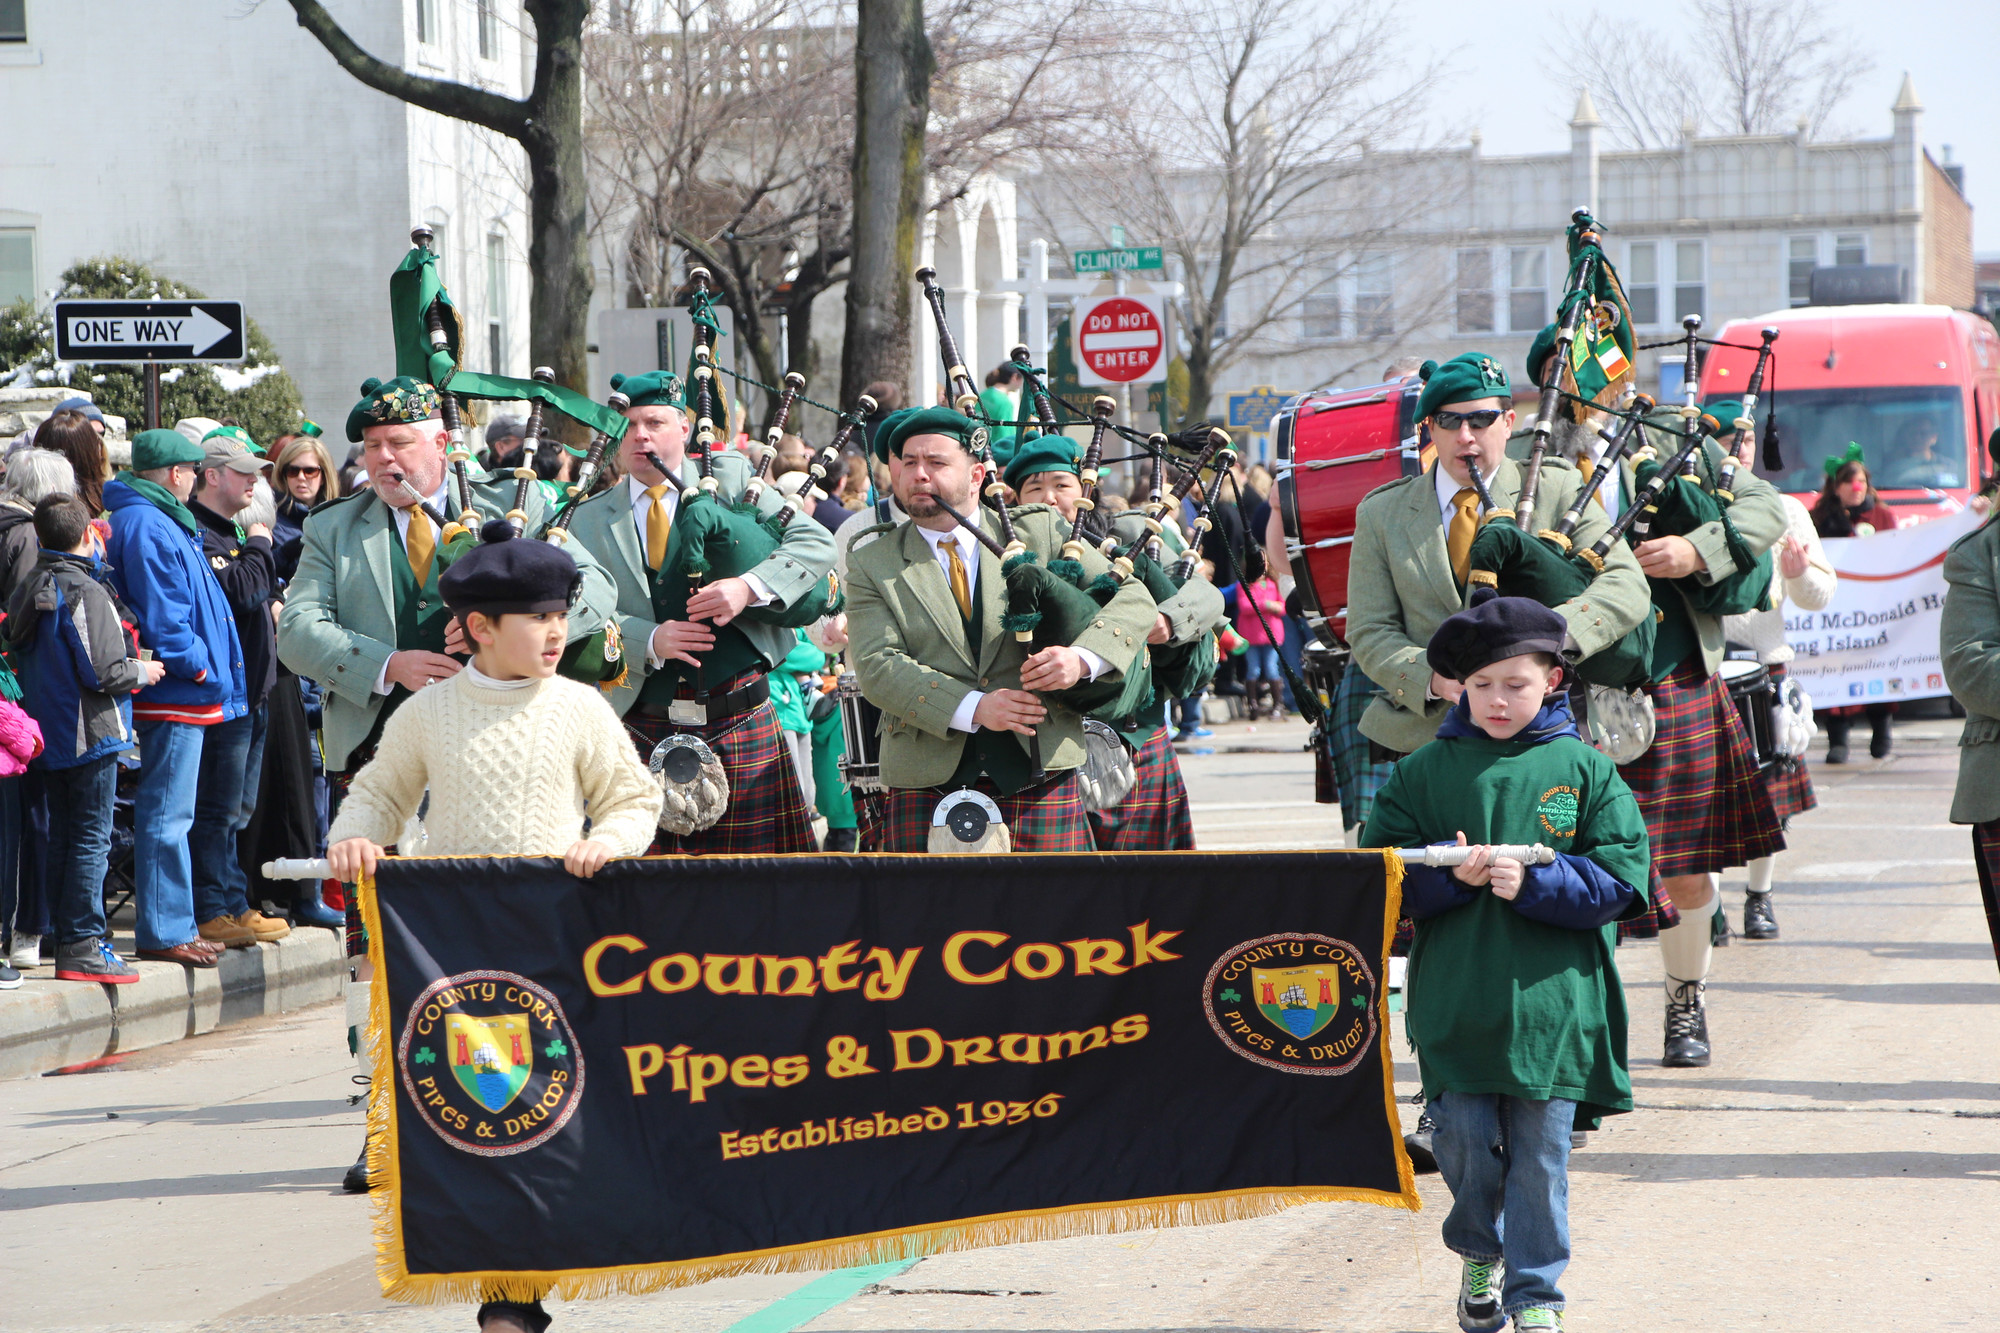 Pipe bands filled the streets with the sounds of traditional Irish music.